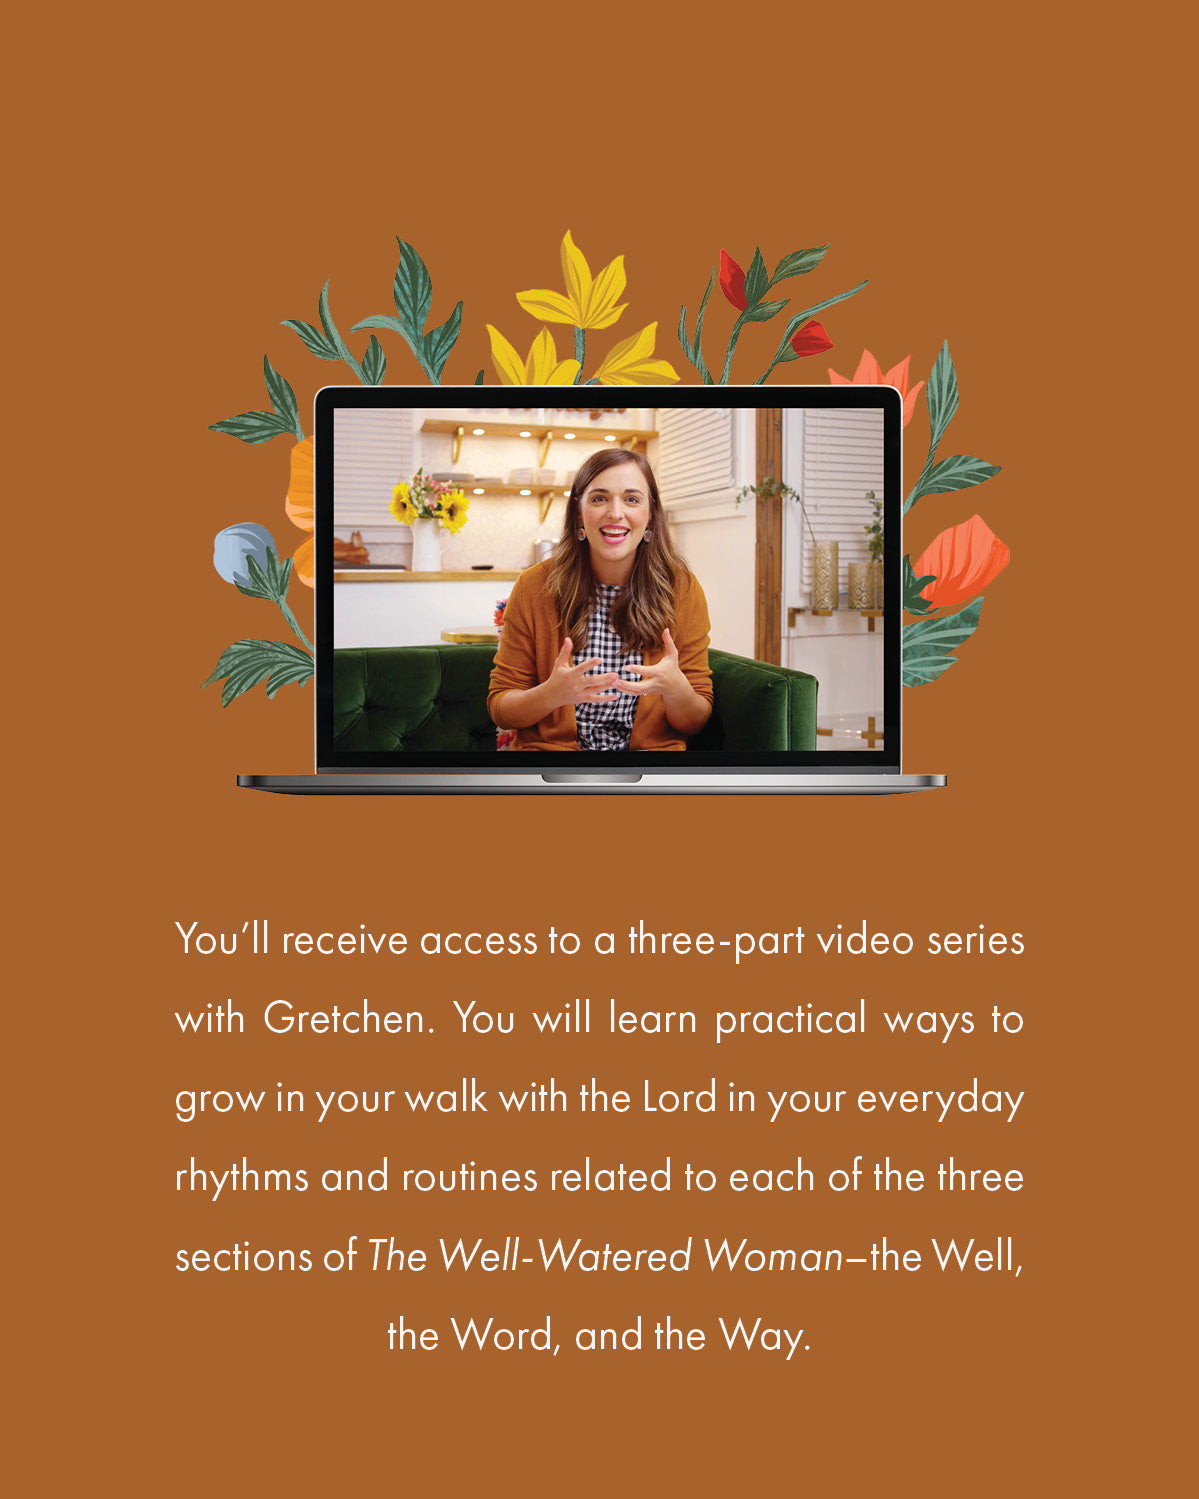 The Well-Watered Woman Book Teaching Videos